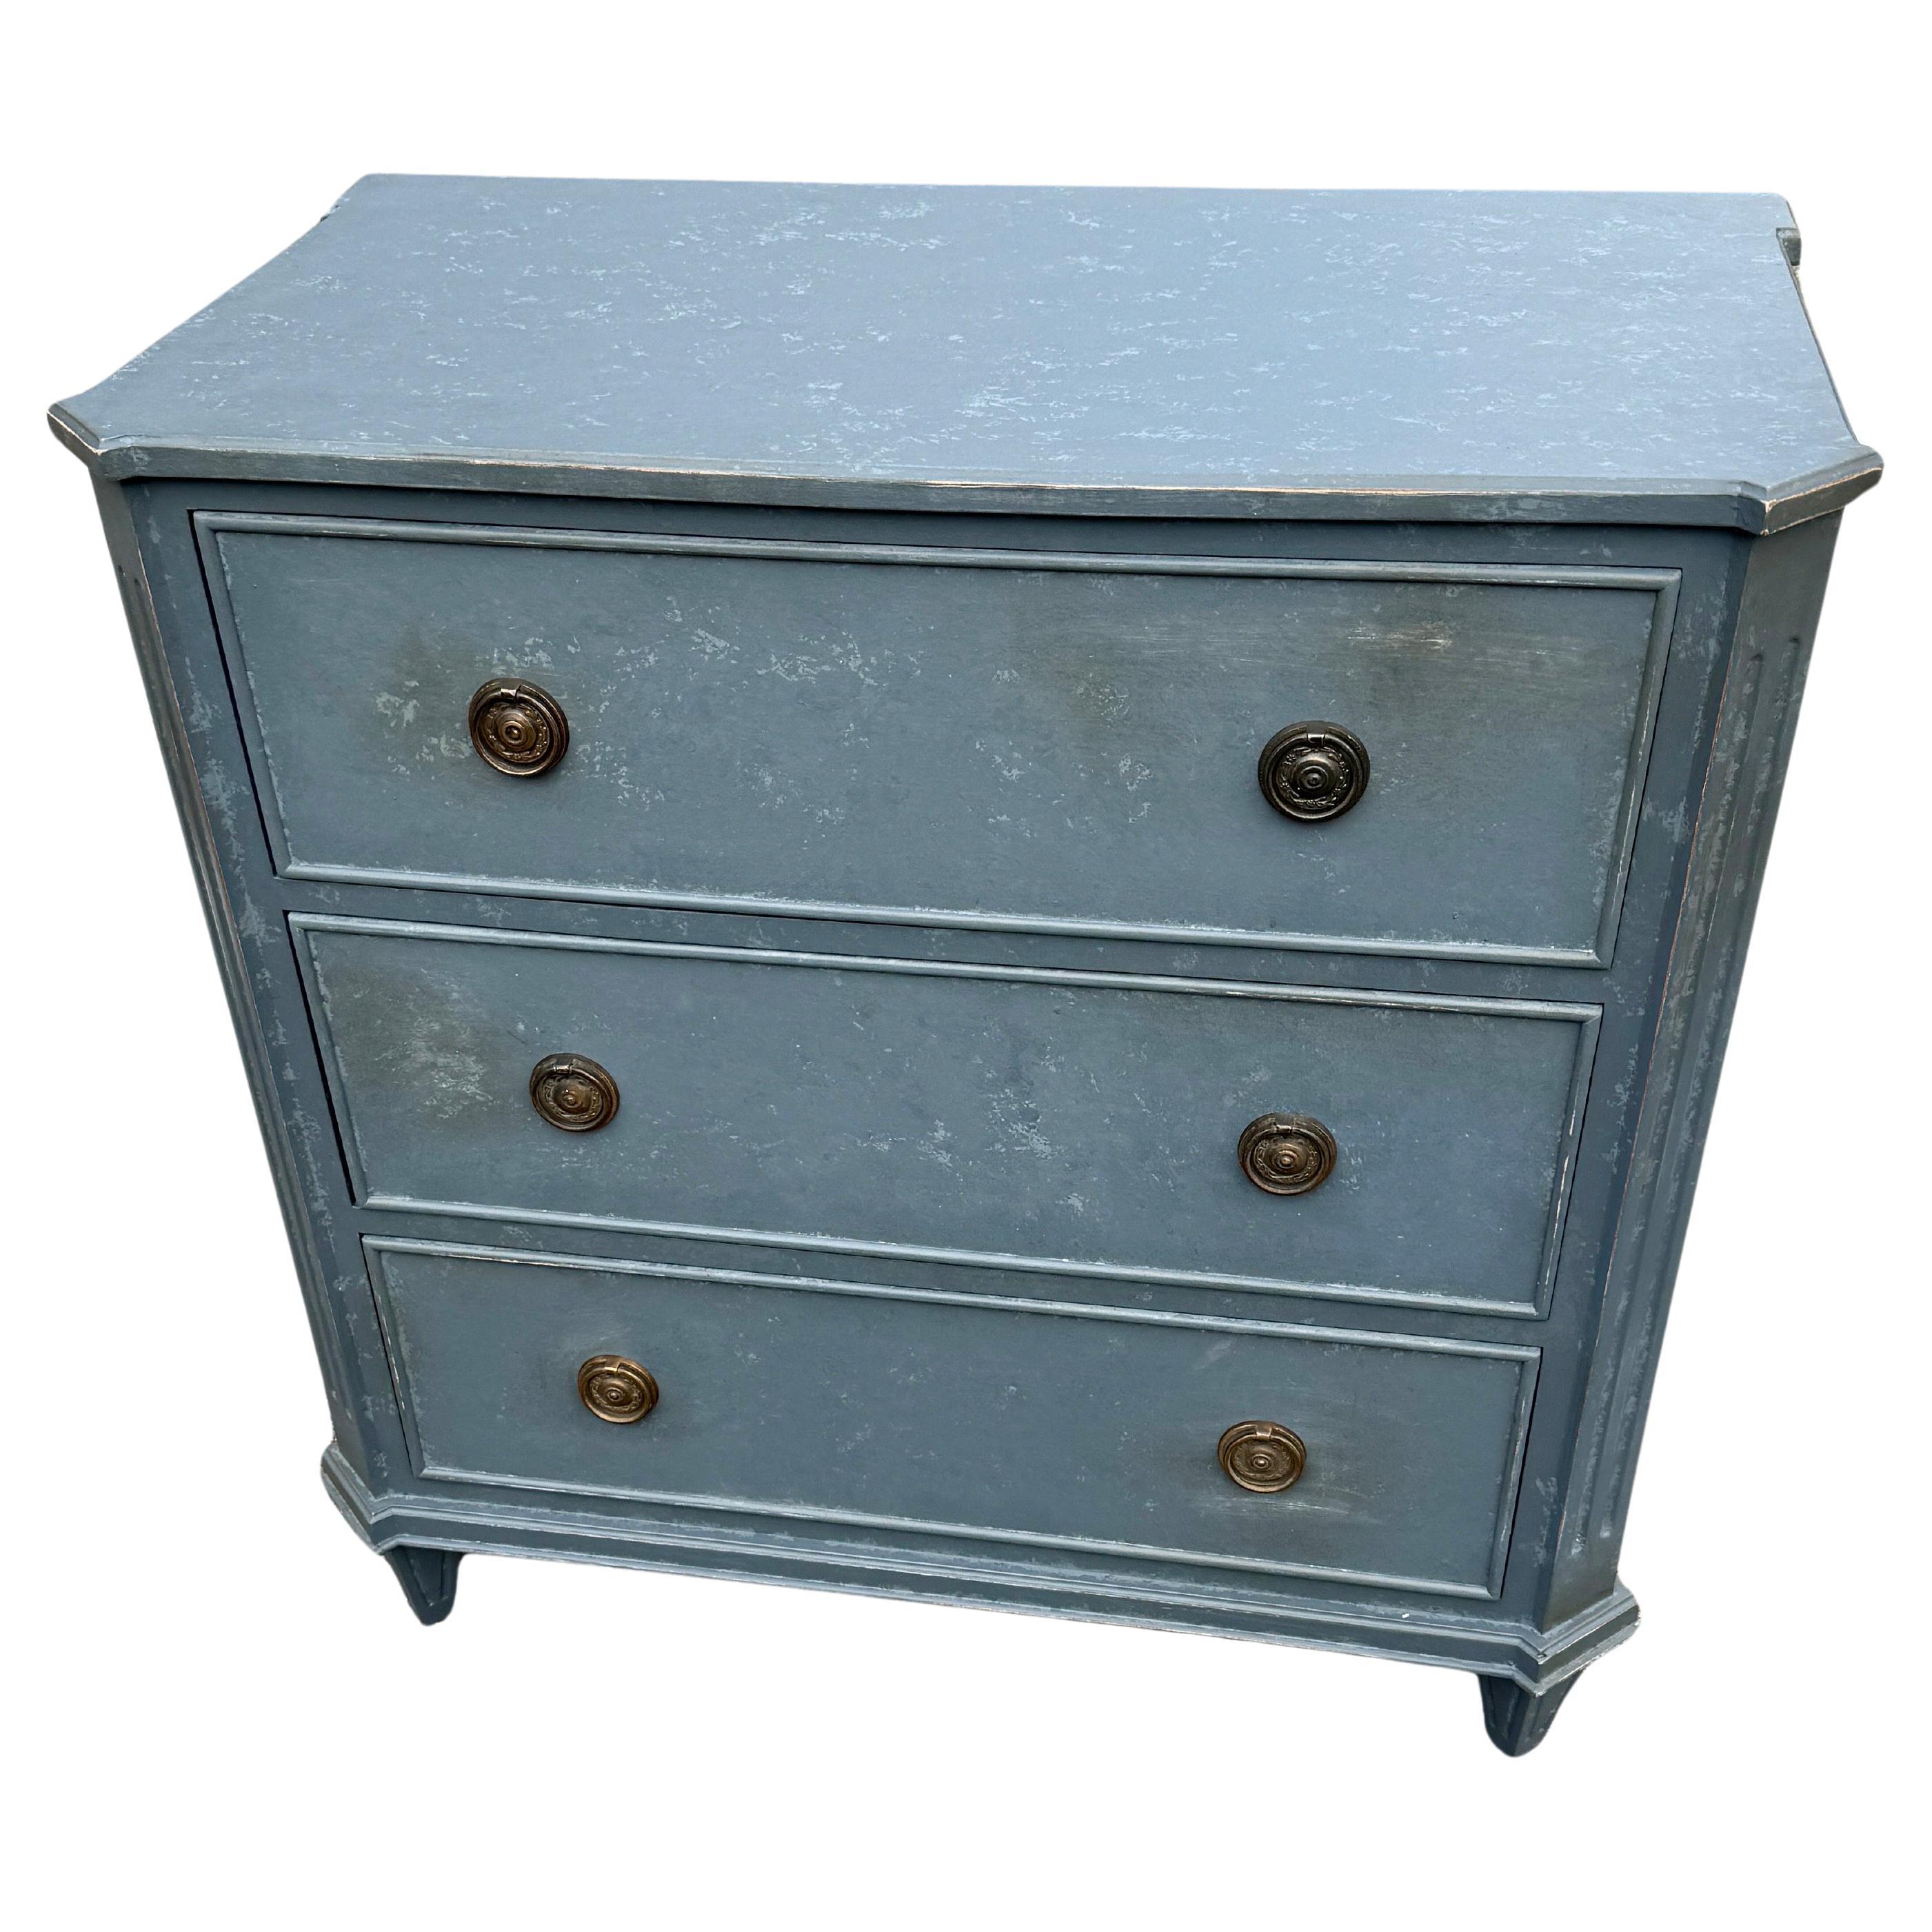 Petroleum Blue Painted Gustavian Style Chest of Drawers

This classic Swedish style three drawer hand-painted chest has been constructed from solid wood with a hand-applied distressed finish and features brass ring hardware. The chest, based on a